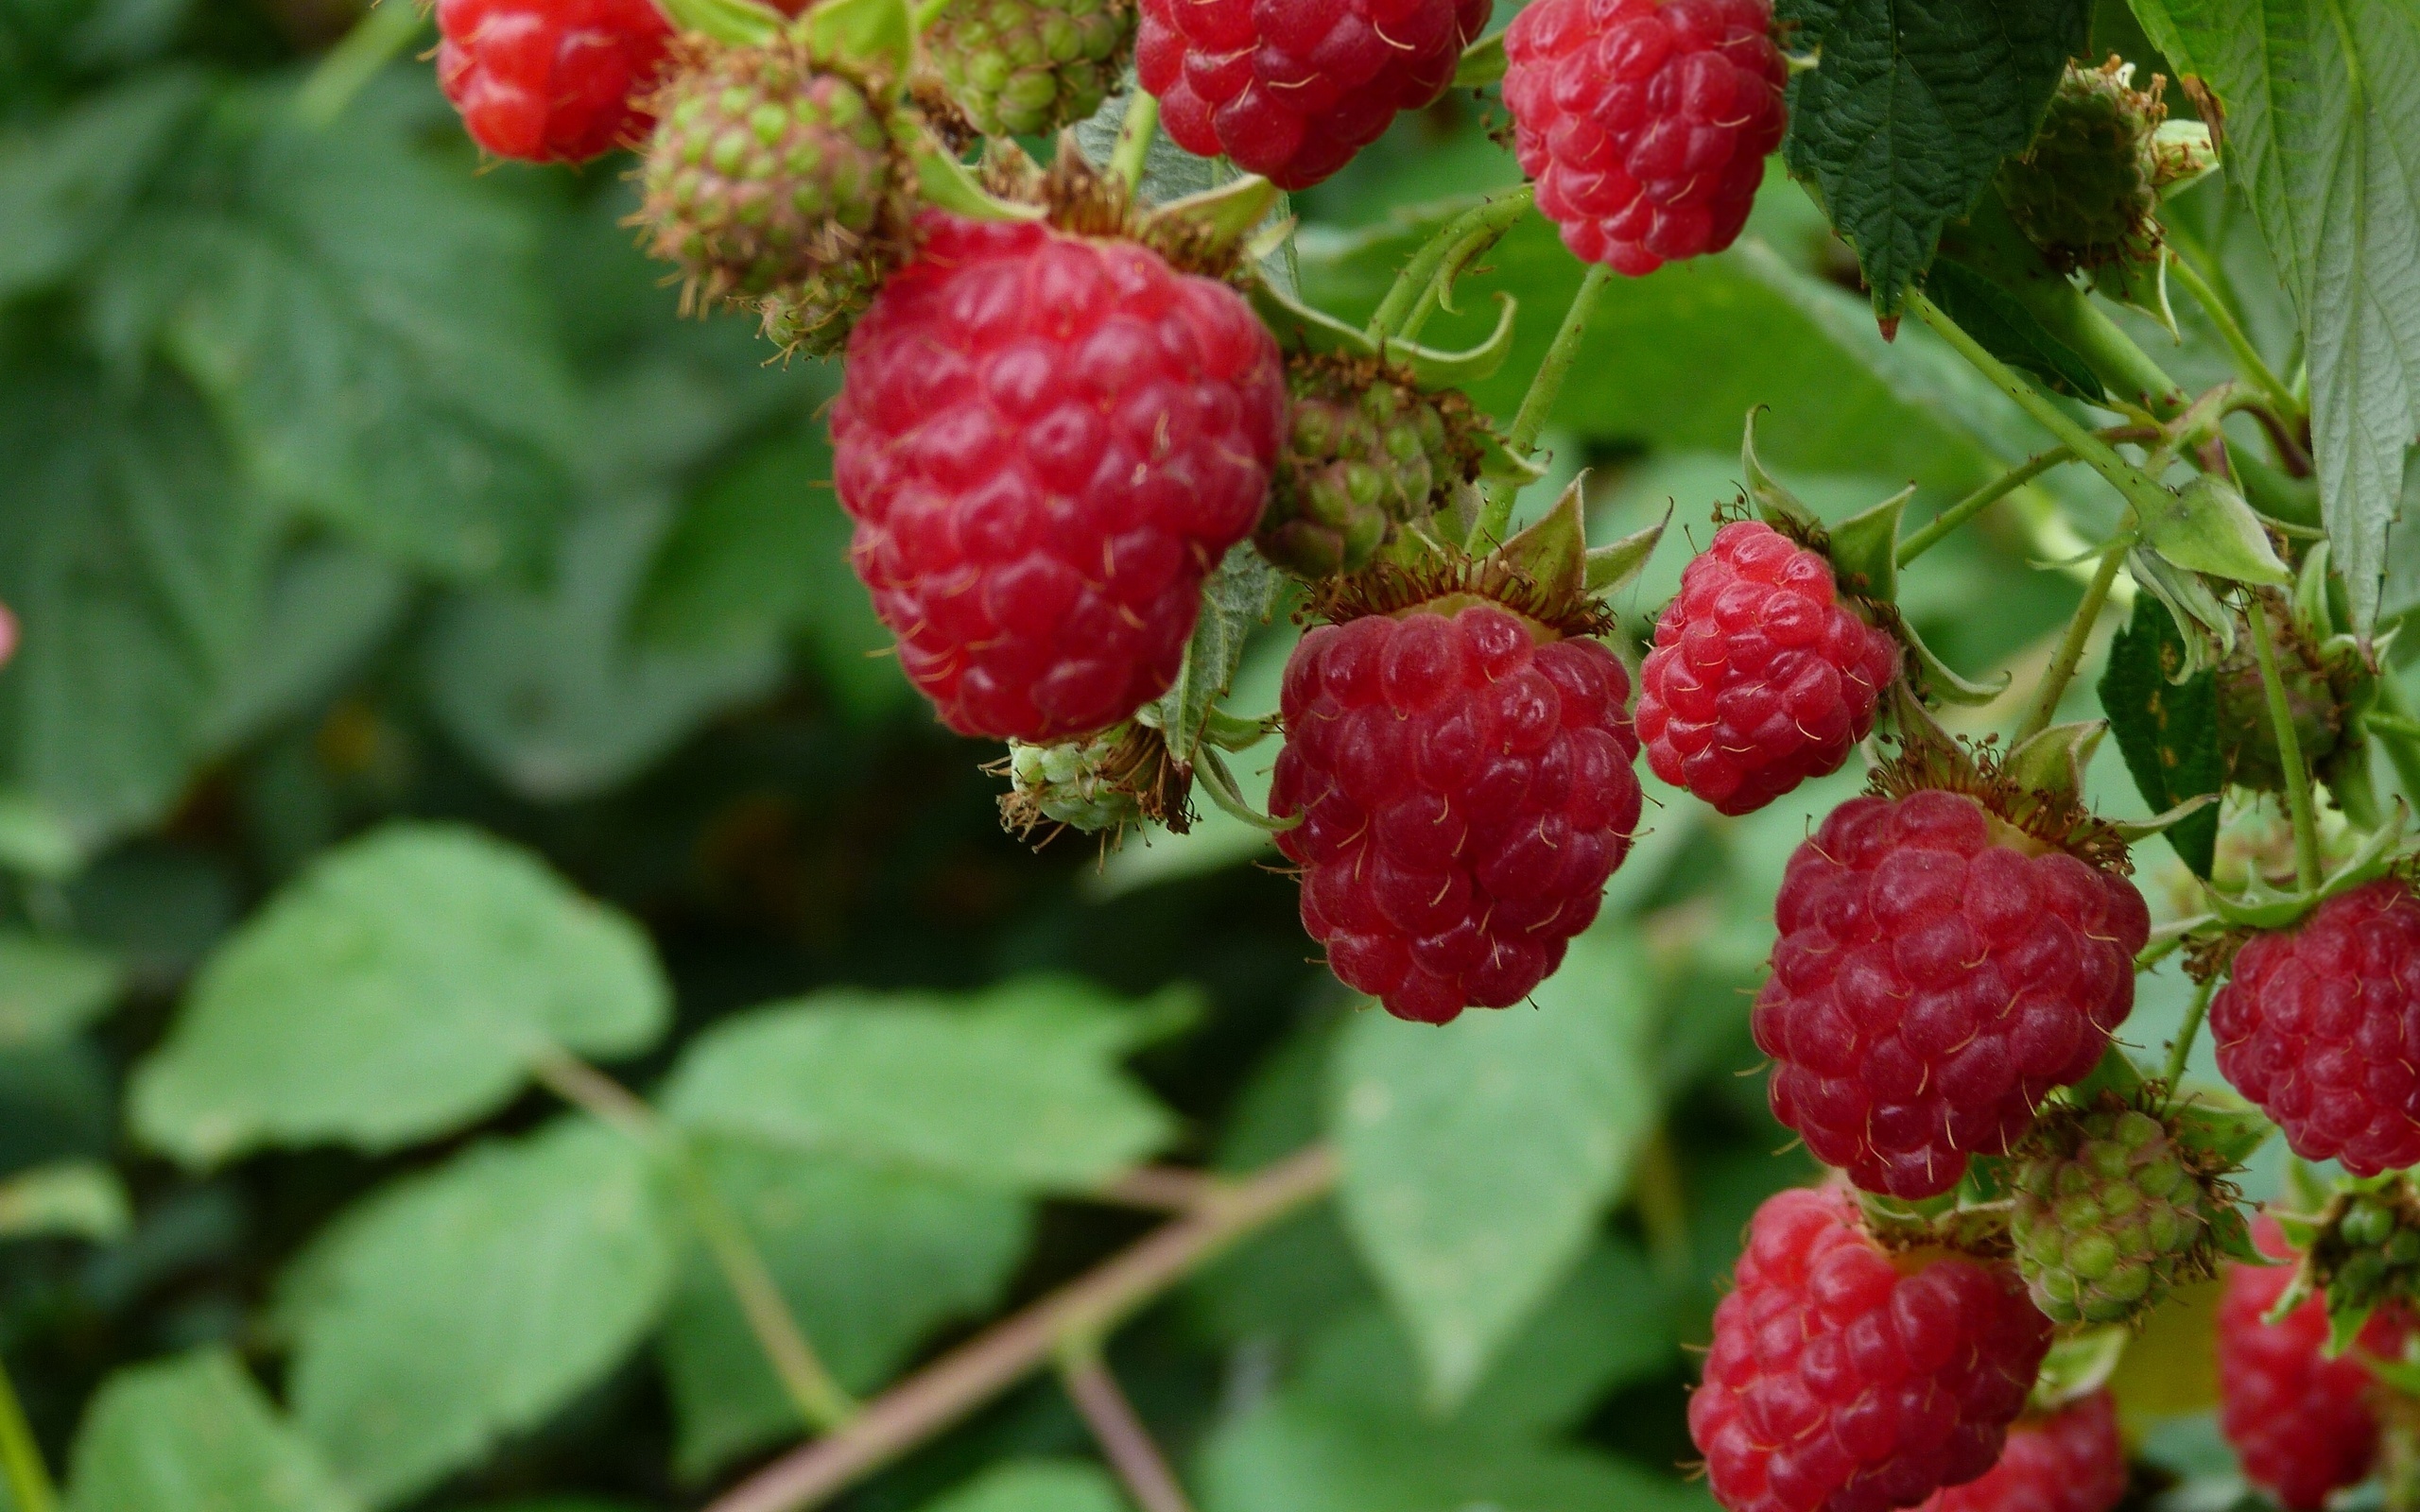 Sensational raspberry, Juicy and ripe, Bursting with flavor, Vibrant and tangy, 2560x1600 HD Desktop